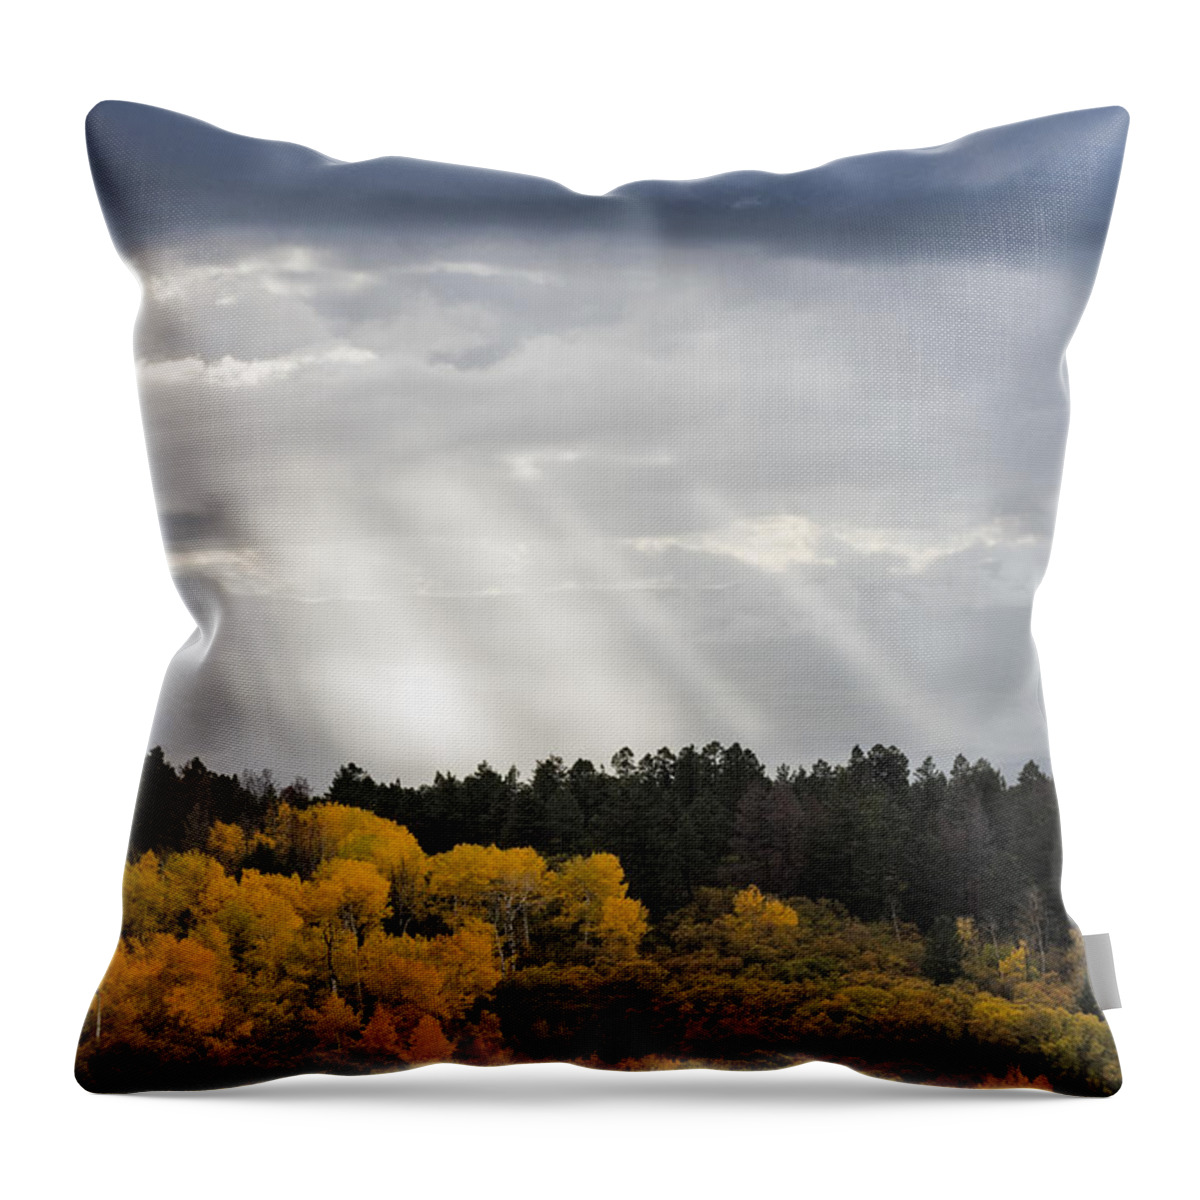 America Throw Pillow featuring the photograph Rainstorm And Autumn Quaking Aspens by John Shaw